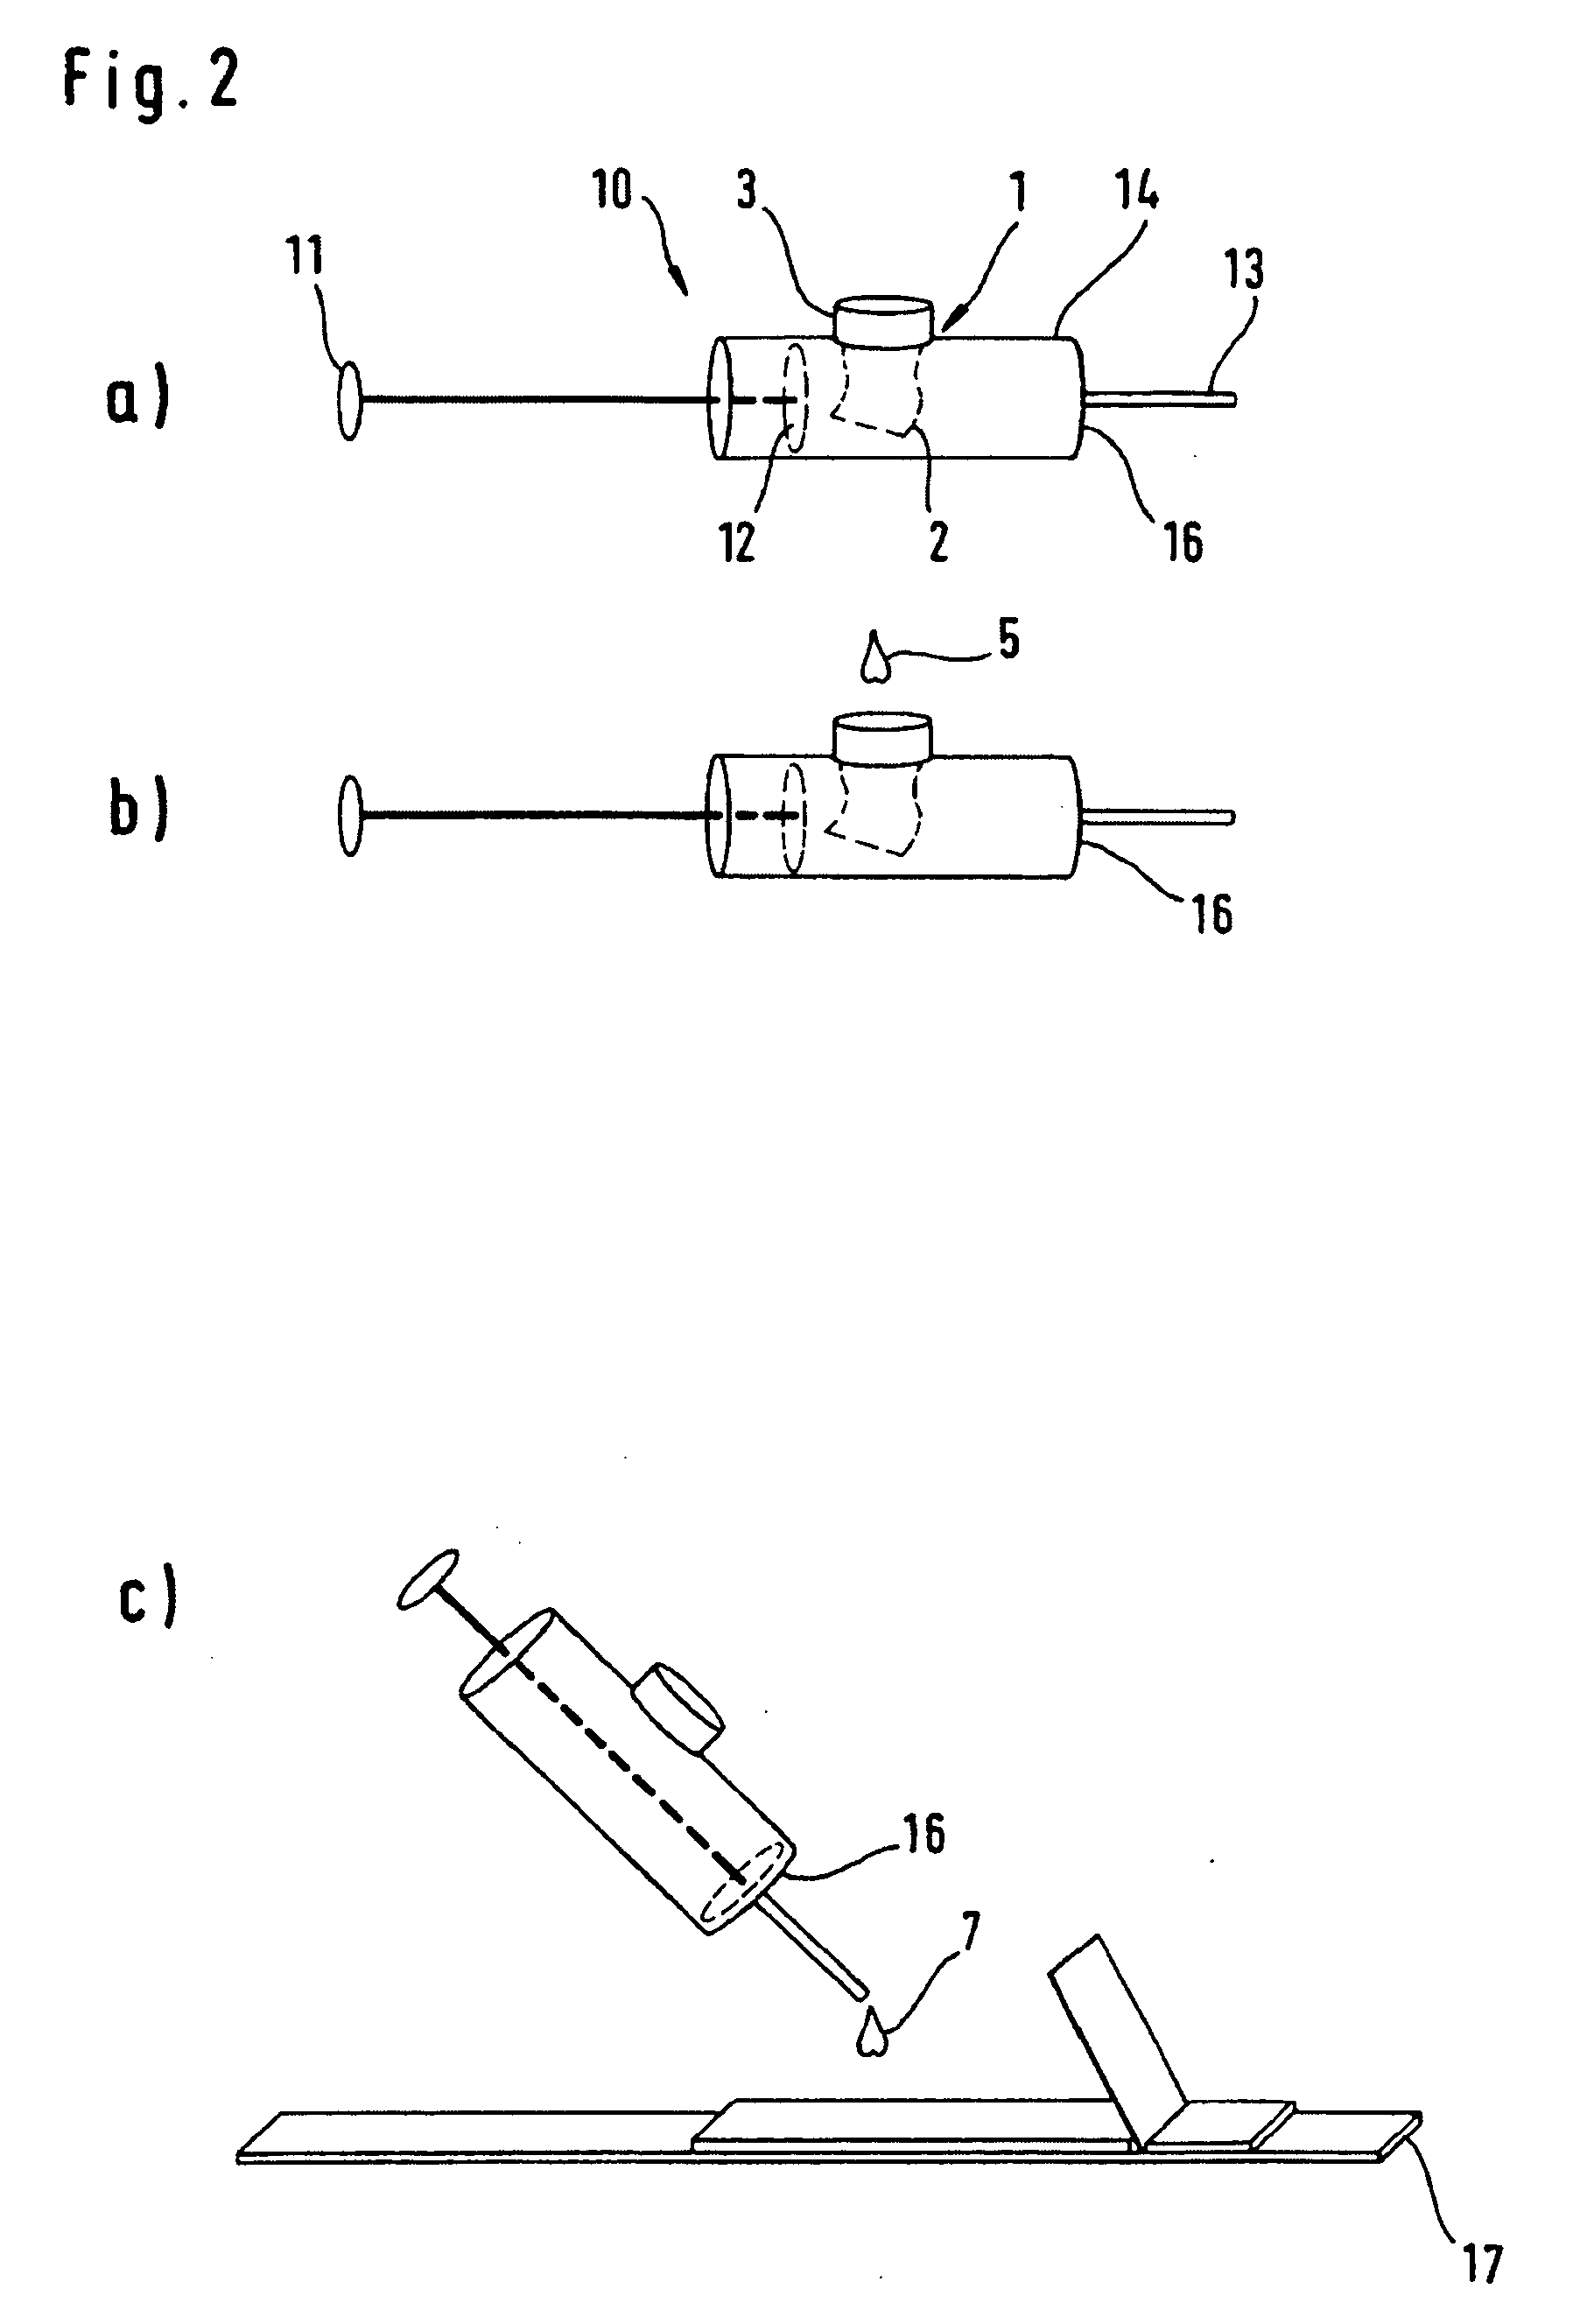 Device and Method for Separating and Discharging Plasma